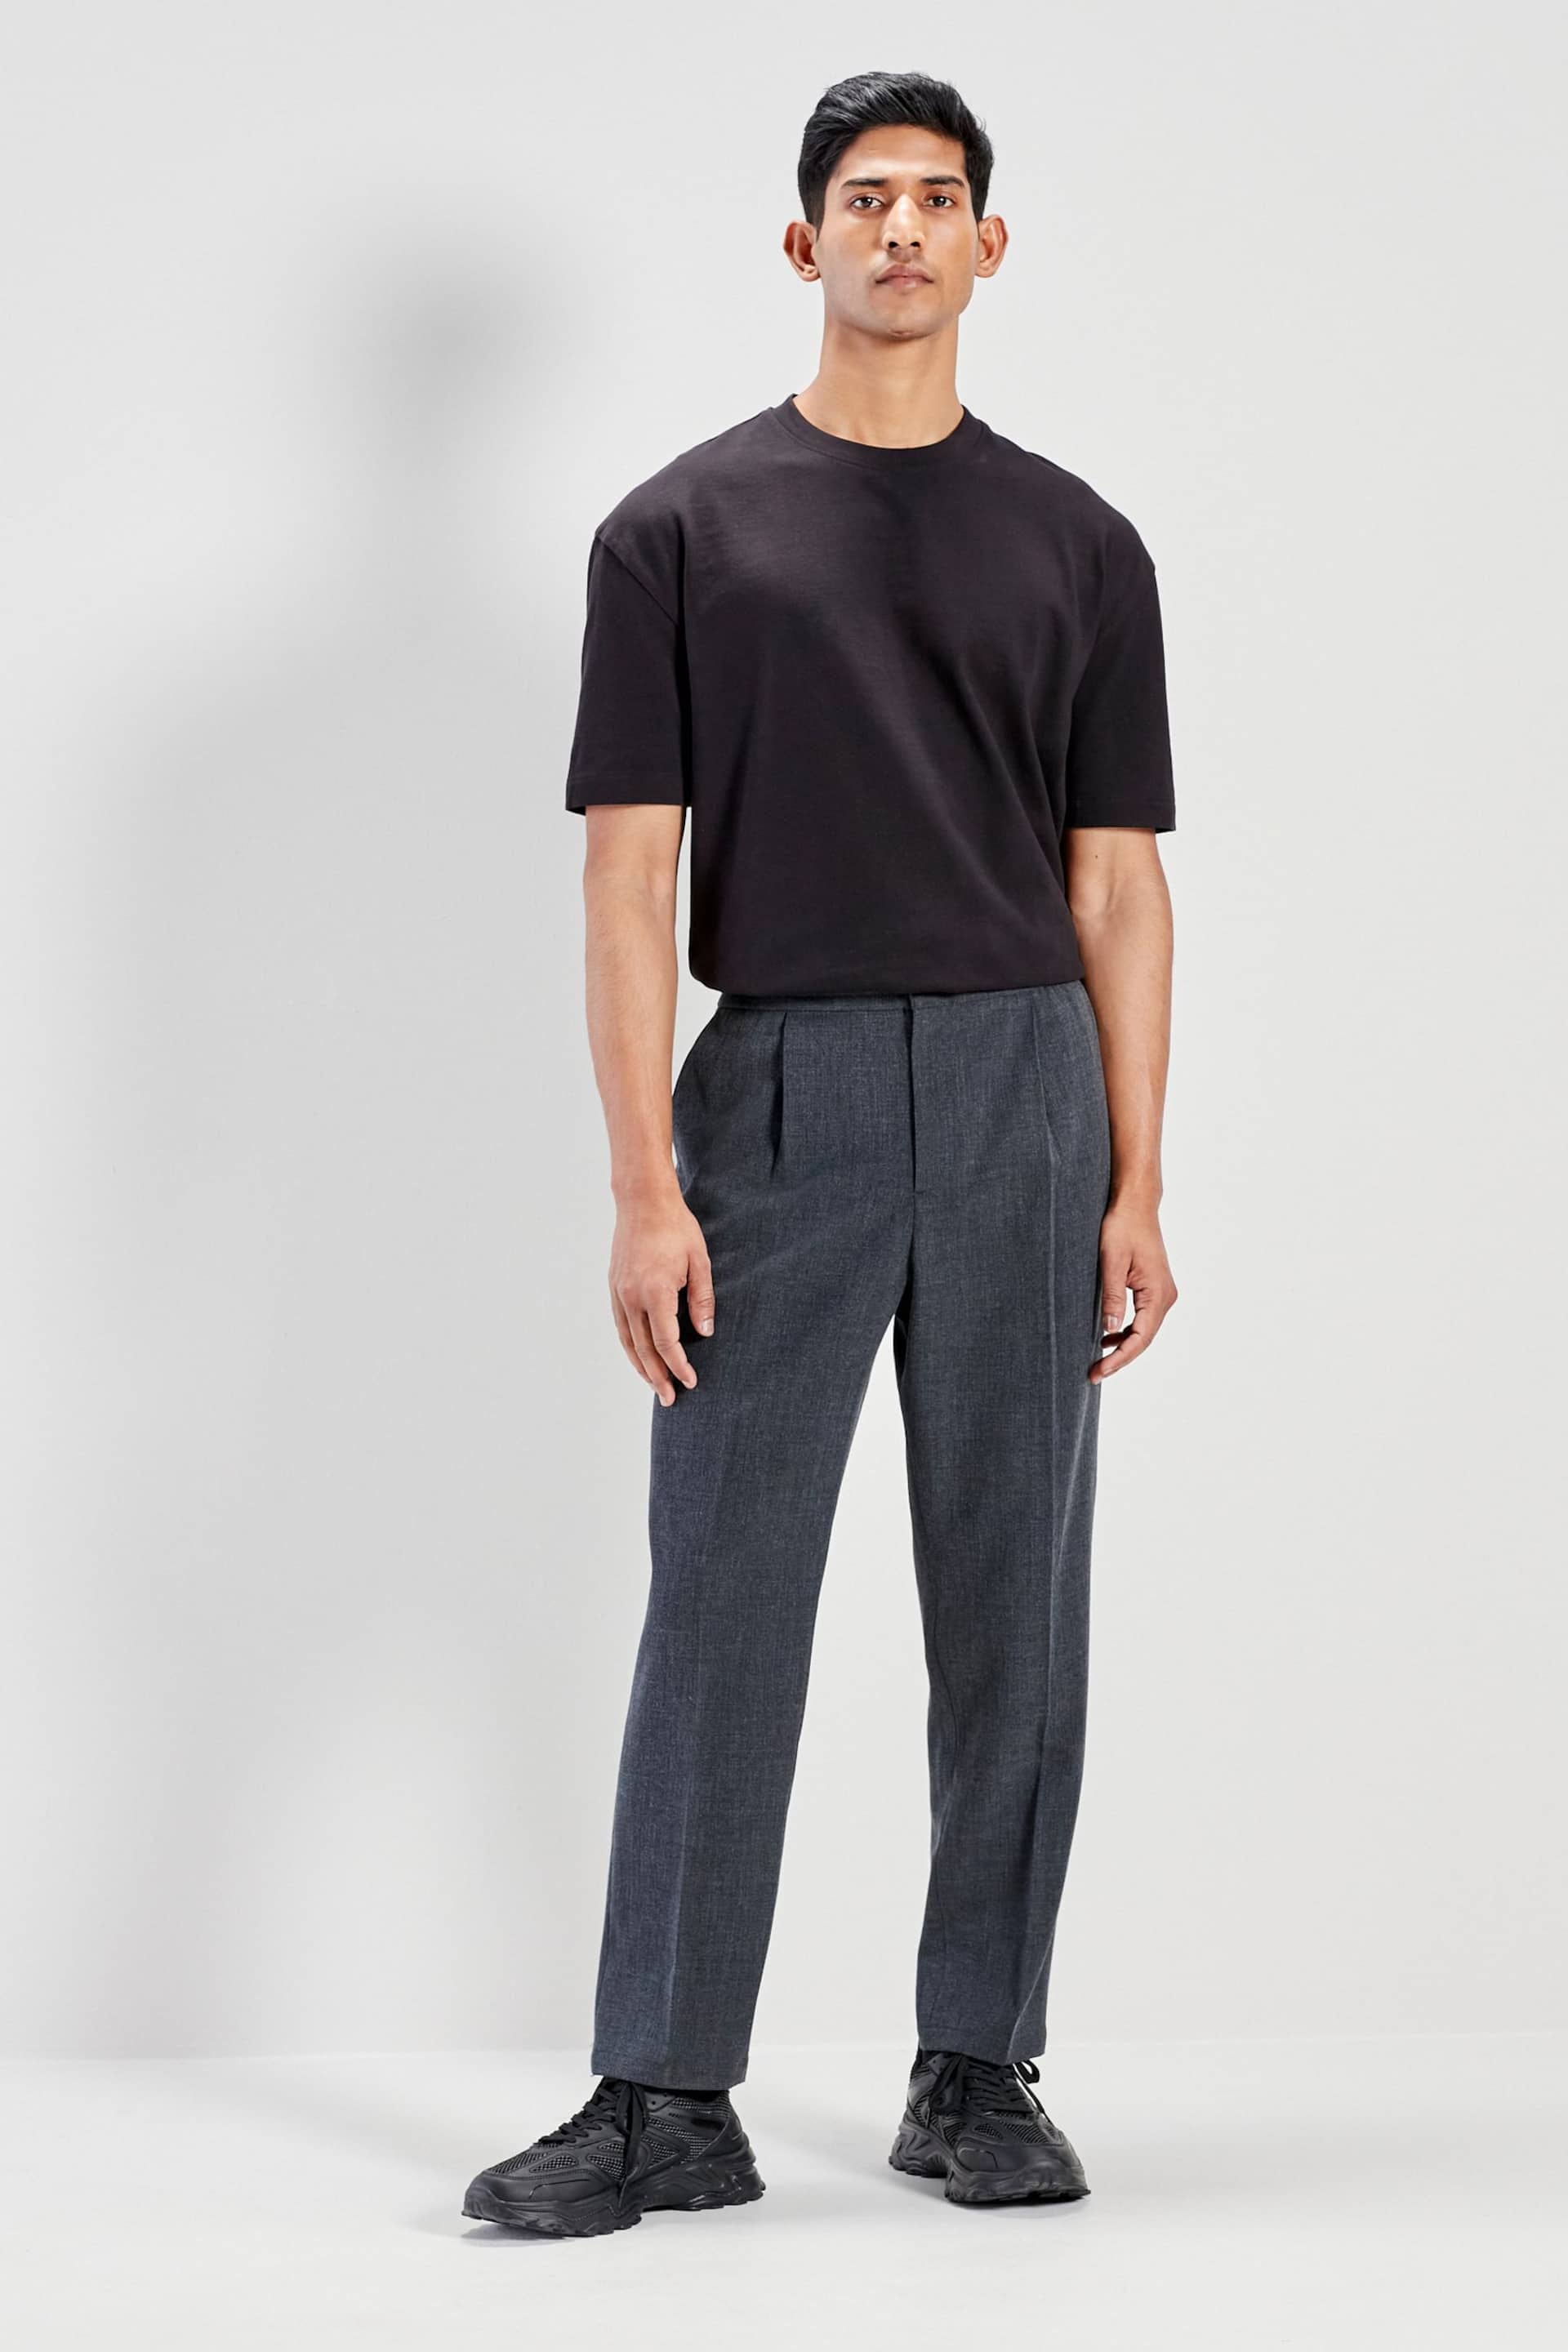 Charcoal Grey Relaxed Fit EDIT Jogger Trousers - Image 2 of 9